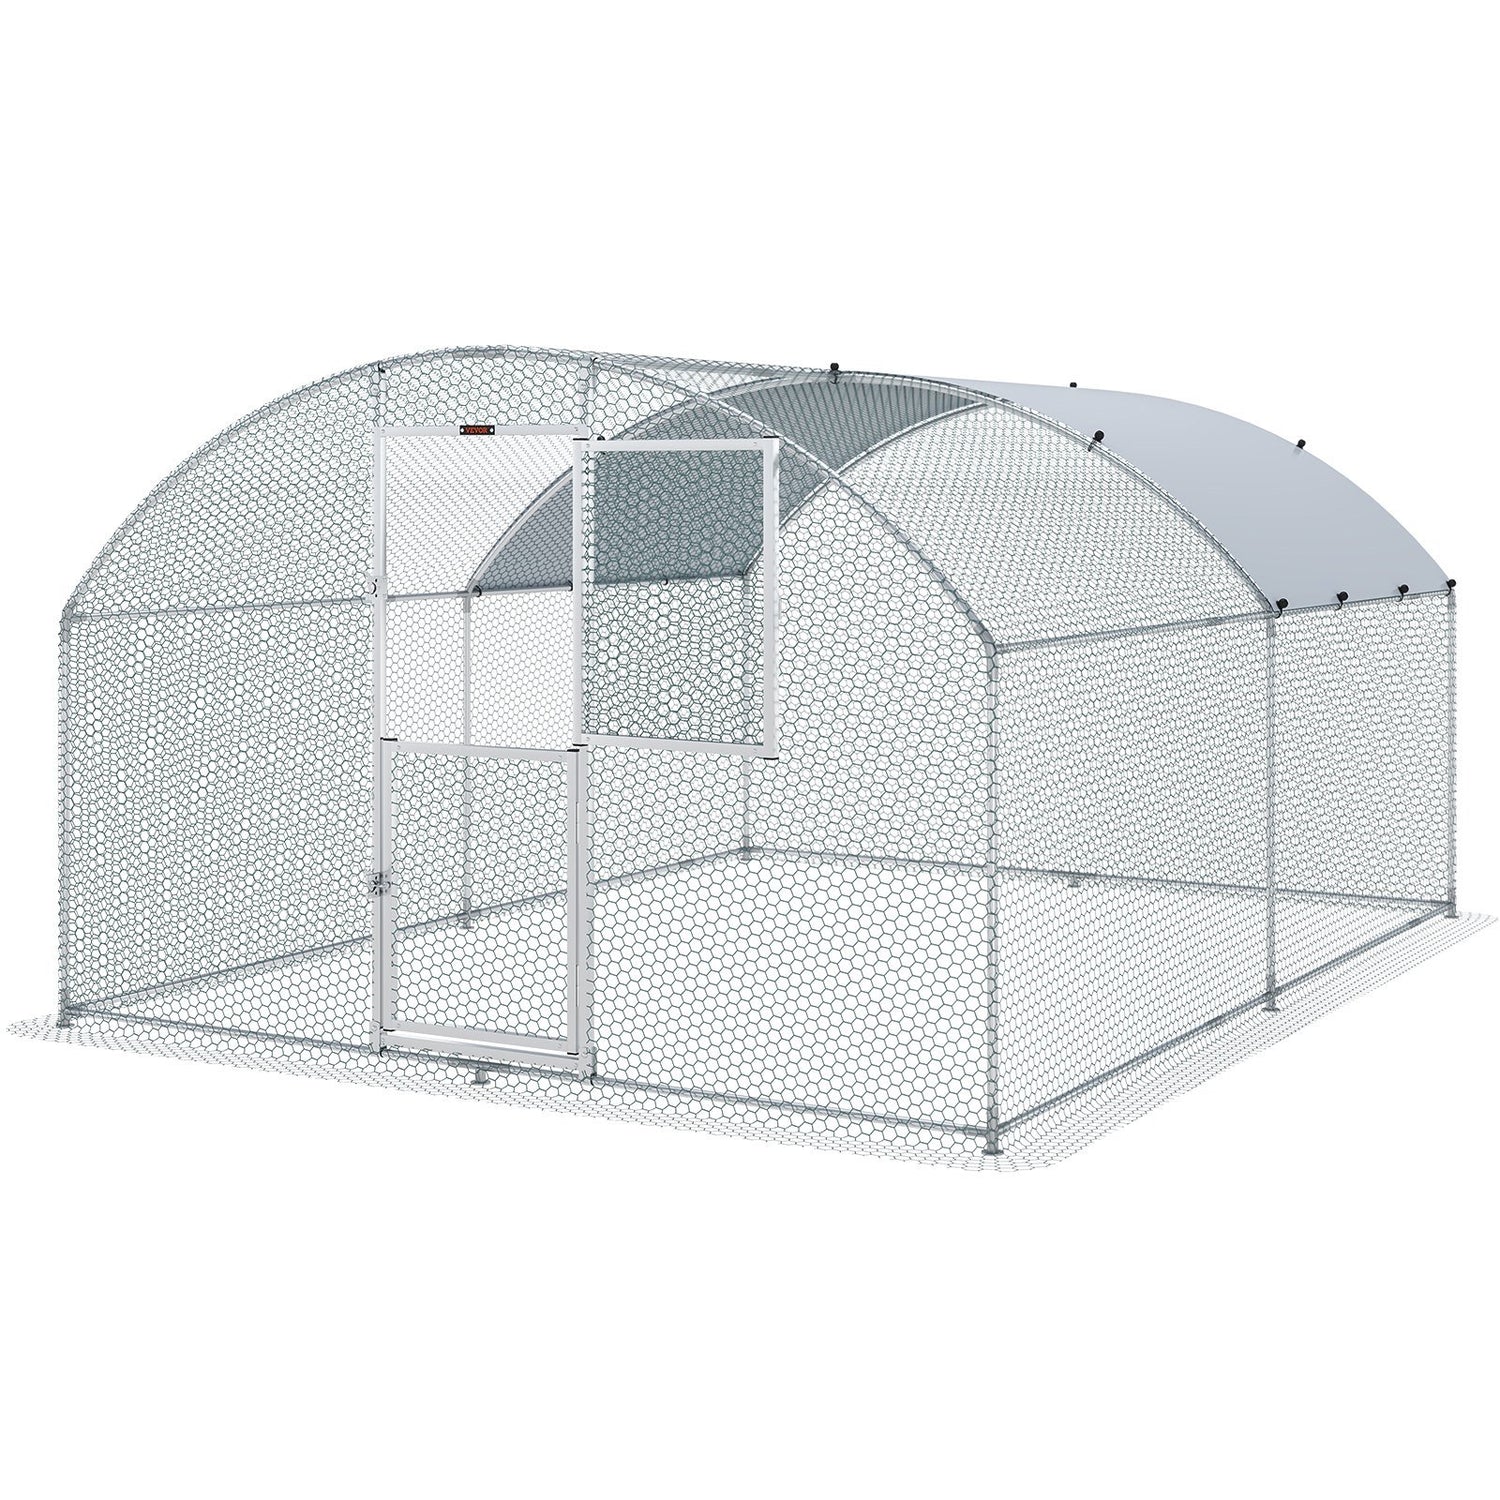 VEVOR Large Metal Chicken Coop with Run, Walkin Chicken Coop for Yard with Waterproof Cover, 13.1 x 9.8 x 6.6 ft, Dome Roof Large Poultry Cage for Hen House, Duck Coop and Rabbit Run, Silver - Ethereal Company